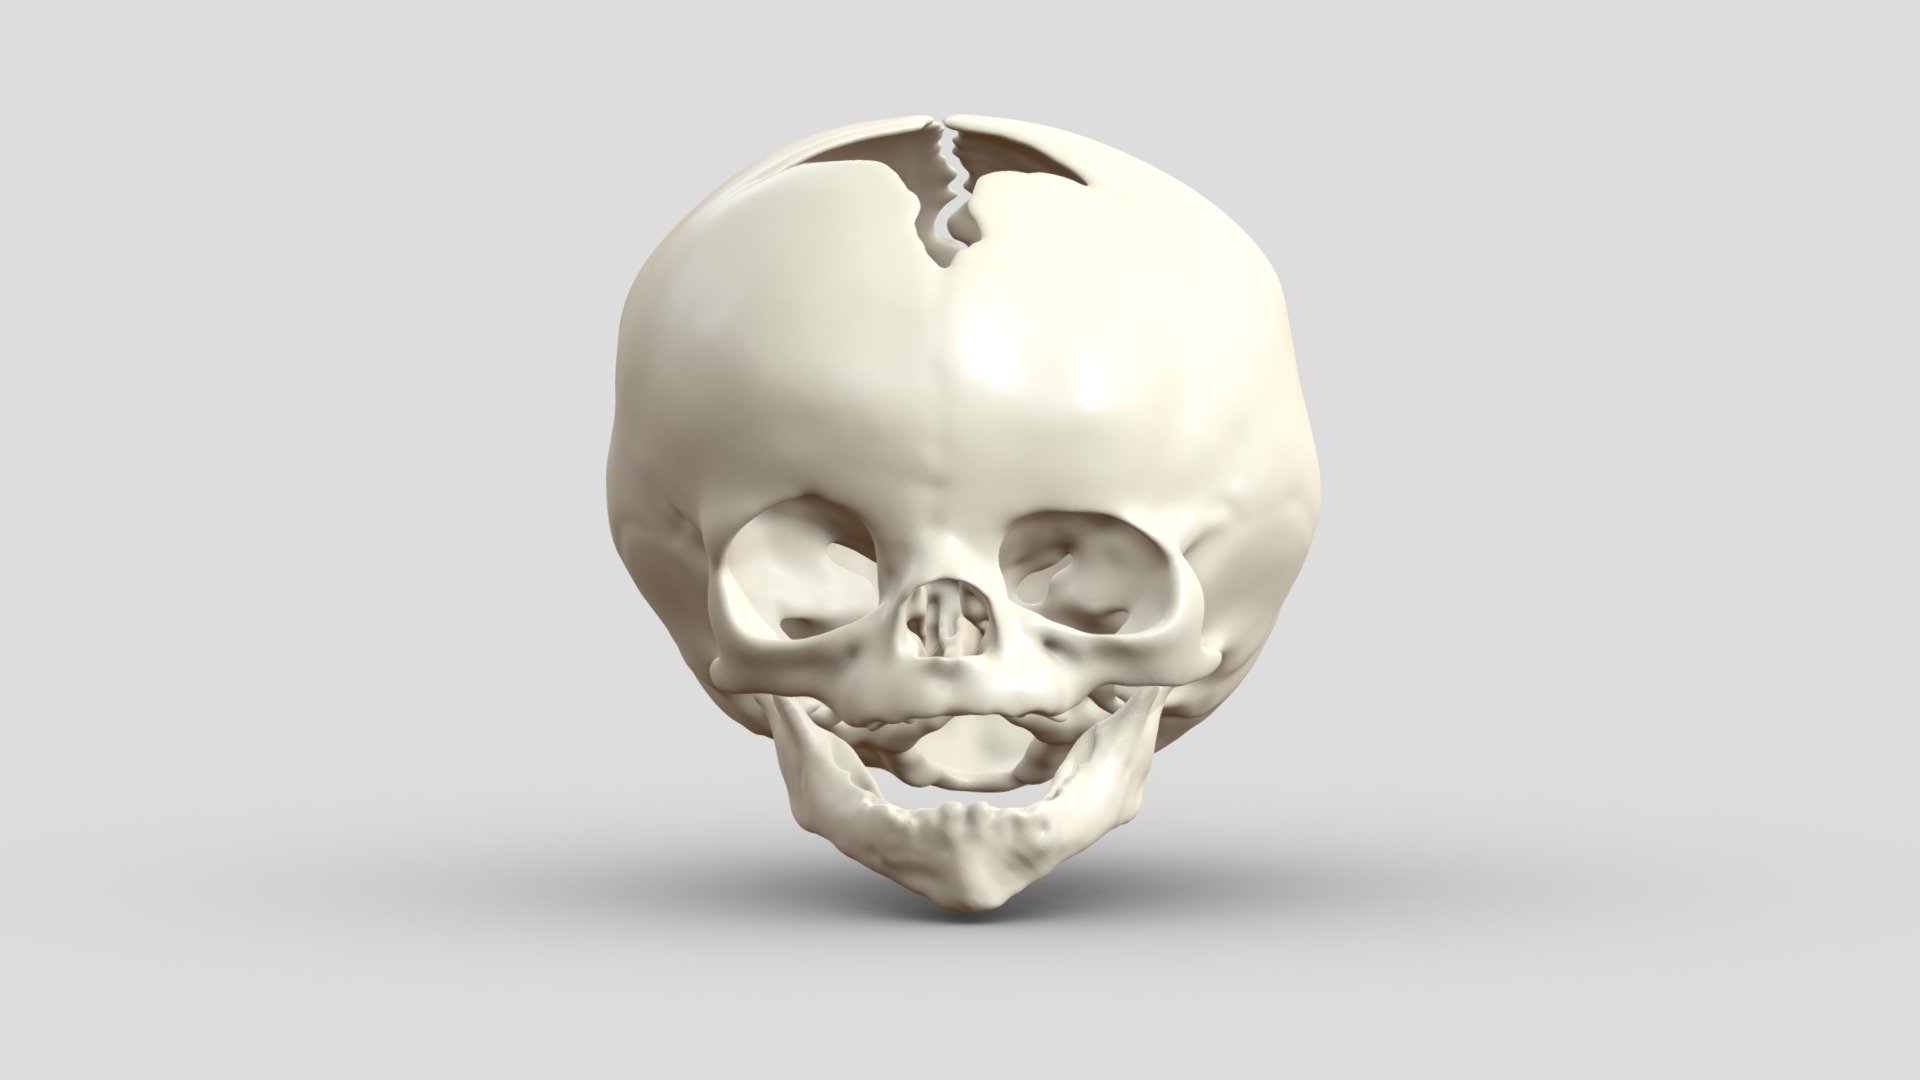 An infant cranium and mandible (6 months old) with left frontosphenoidal craniosynostosis. Small gaps between cranial bones were filled to make it easier to 3D print. The mandible was also solidified to make 3D printing easier (unerupted teeth are not visible)&ndash;central mandibular incisors are erupted. You can also cut the cranium before 3D printing to have access to the endocranial anatomy.

I segmented this from a computed tomography scan from Embodi3D.

Download includes beige PLY of the cranium and mandible combined. The additional file contains the separated STL models for 3D printing 3d model